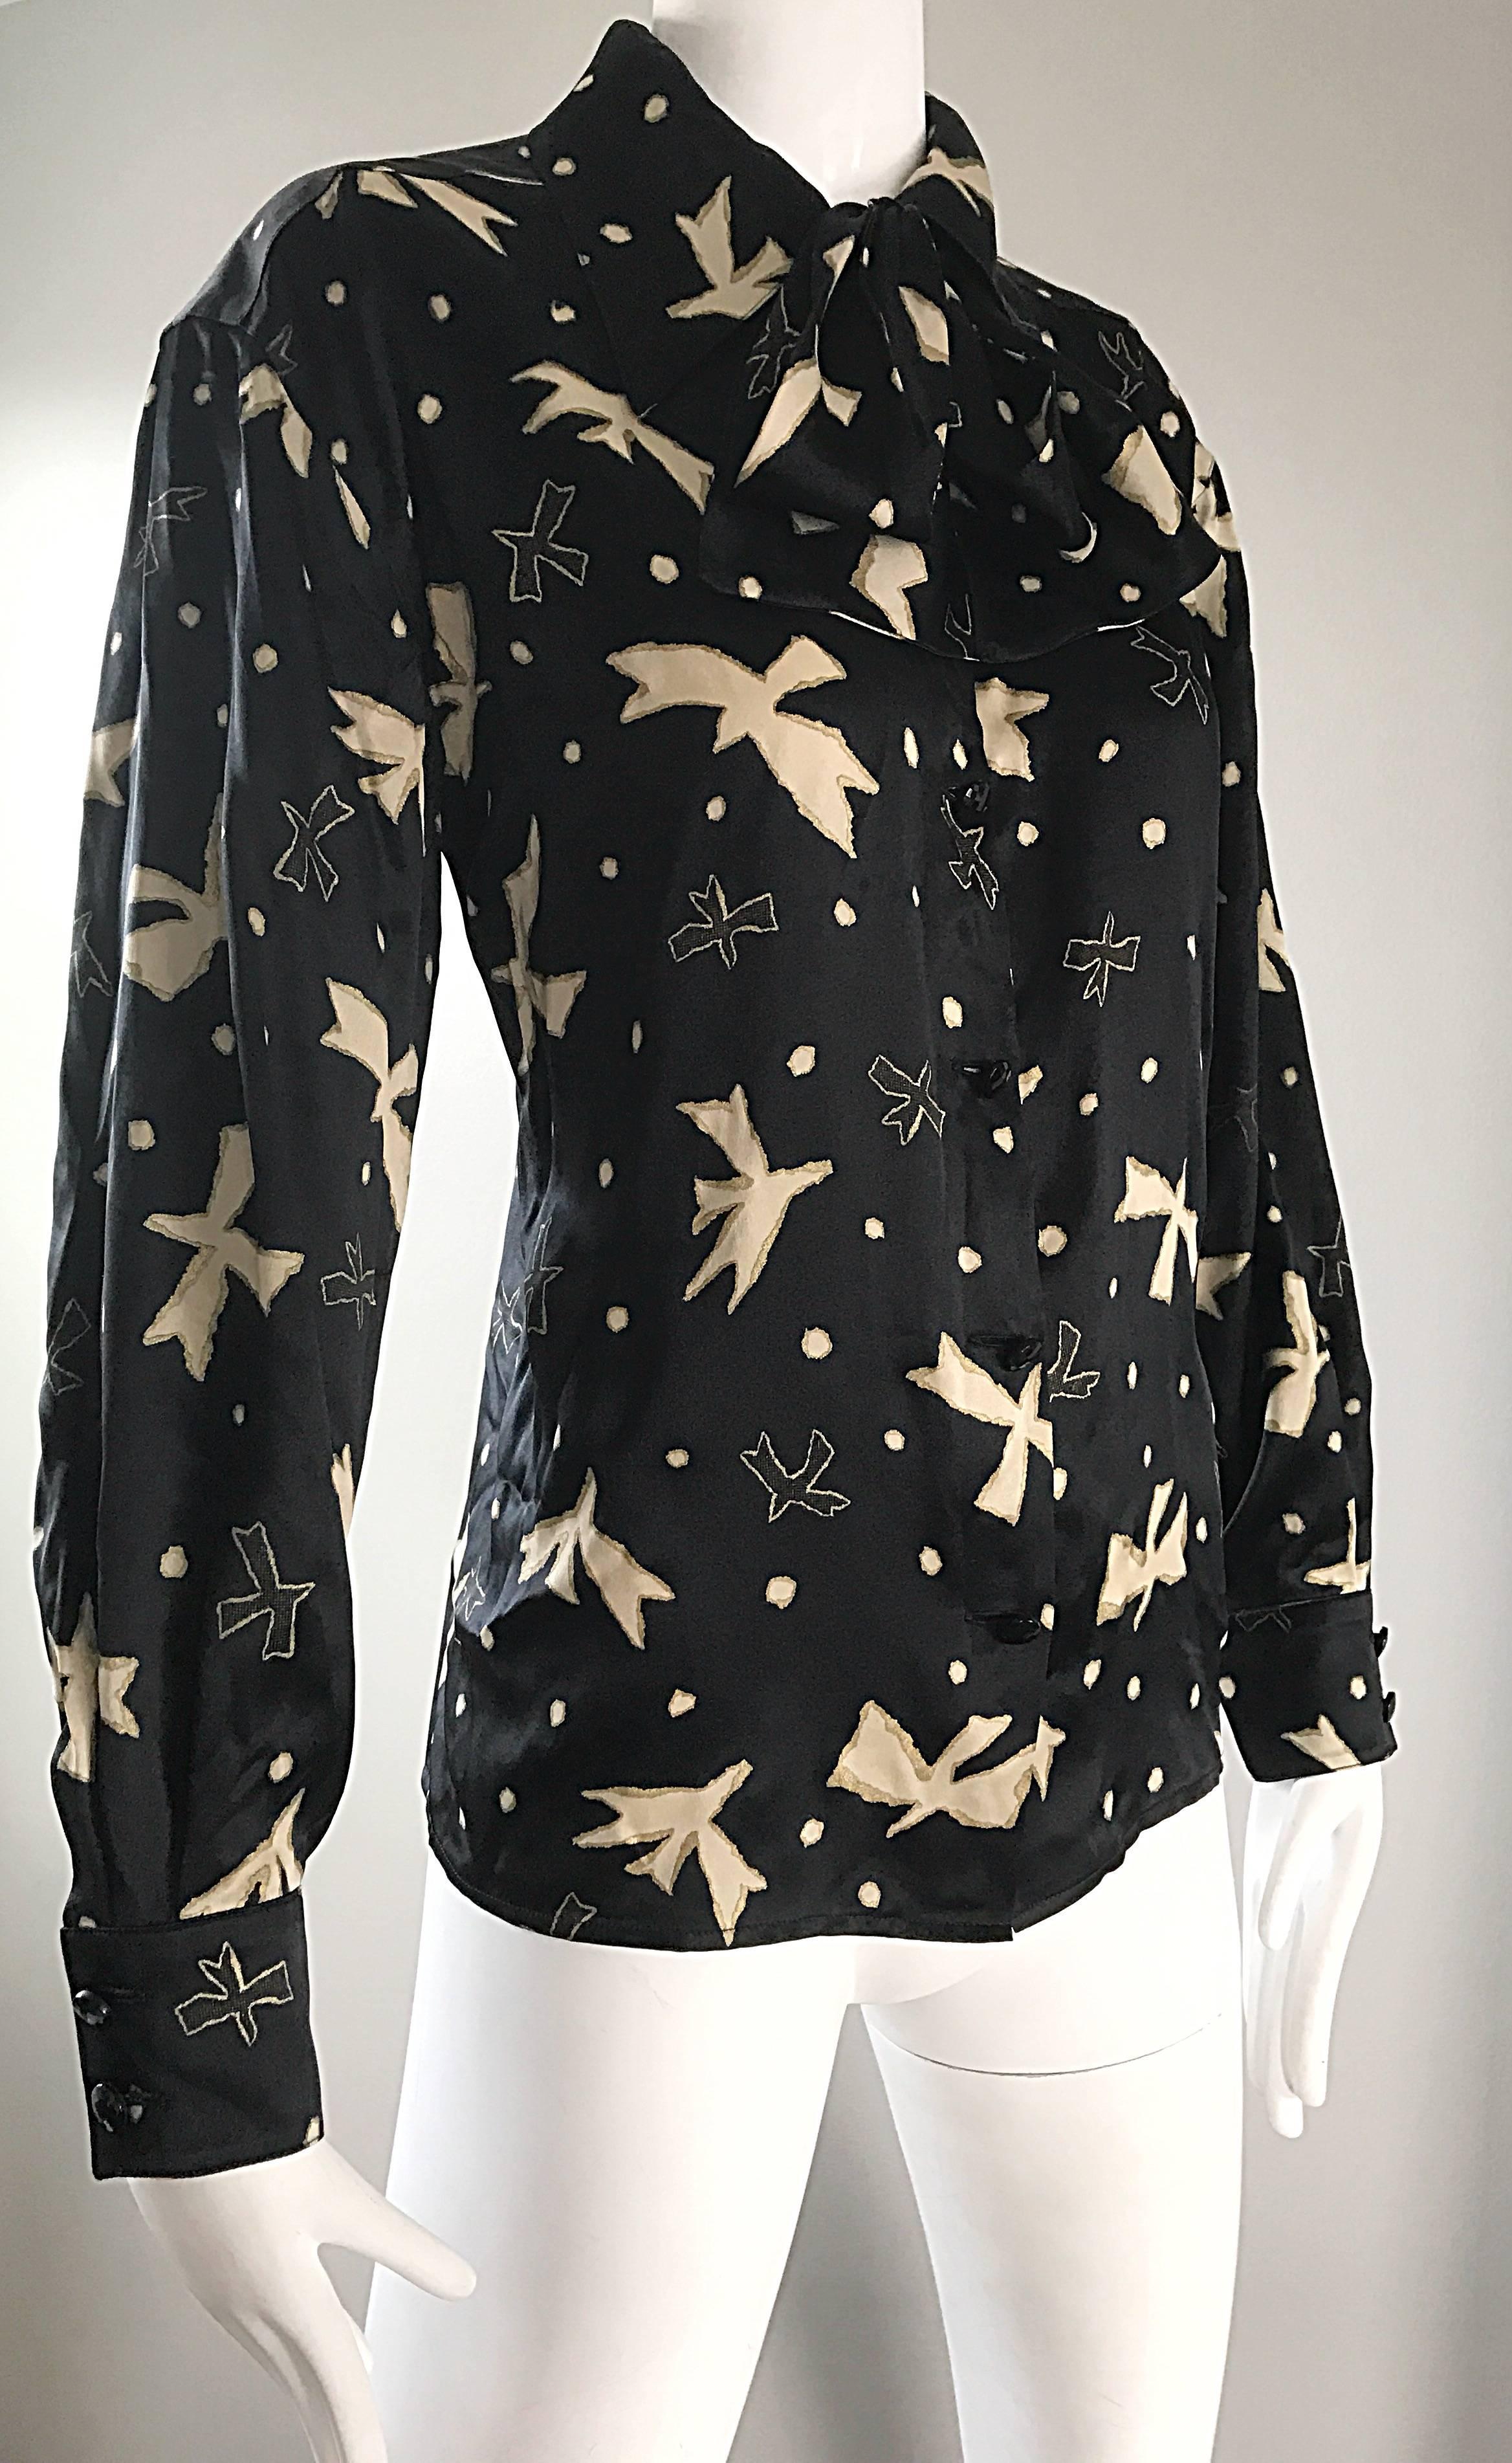 Emanuel Ungaro Vintage Black and White 1990s Bird Print Pussycat Bow Silk Blouse In Excellent Condition For Sale In San Diego, CA